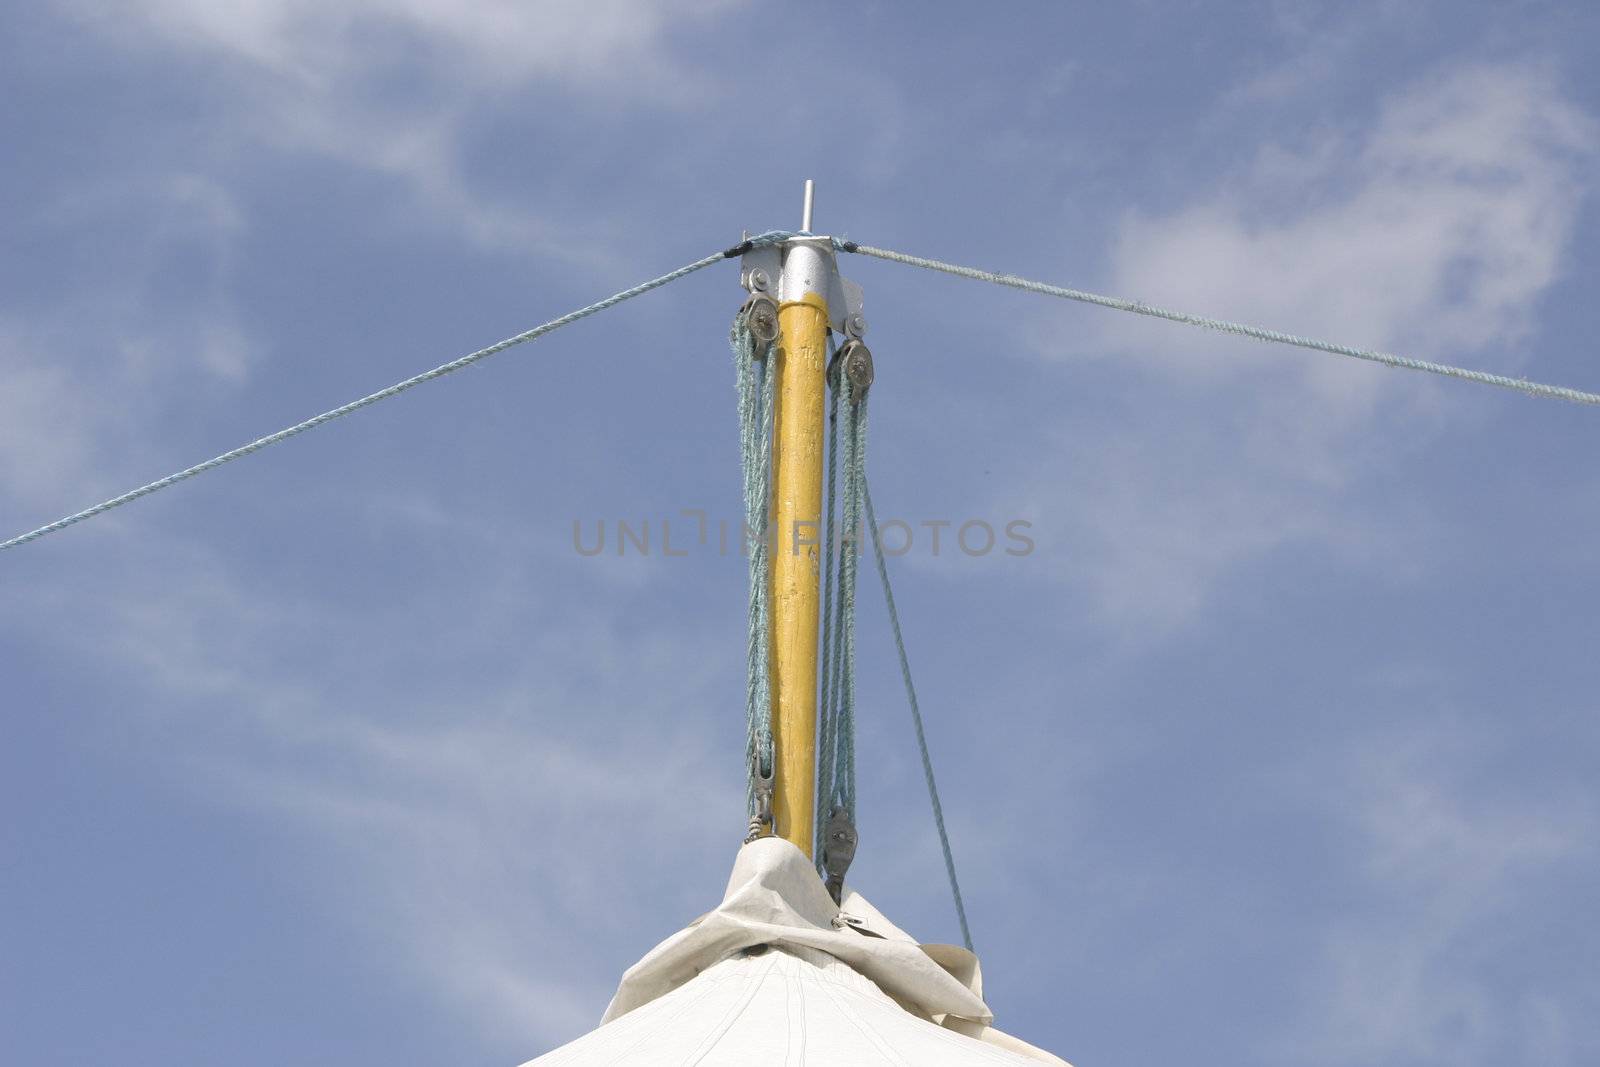 marquee pole support fastened with wire guides 